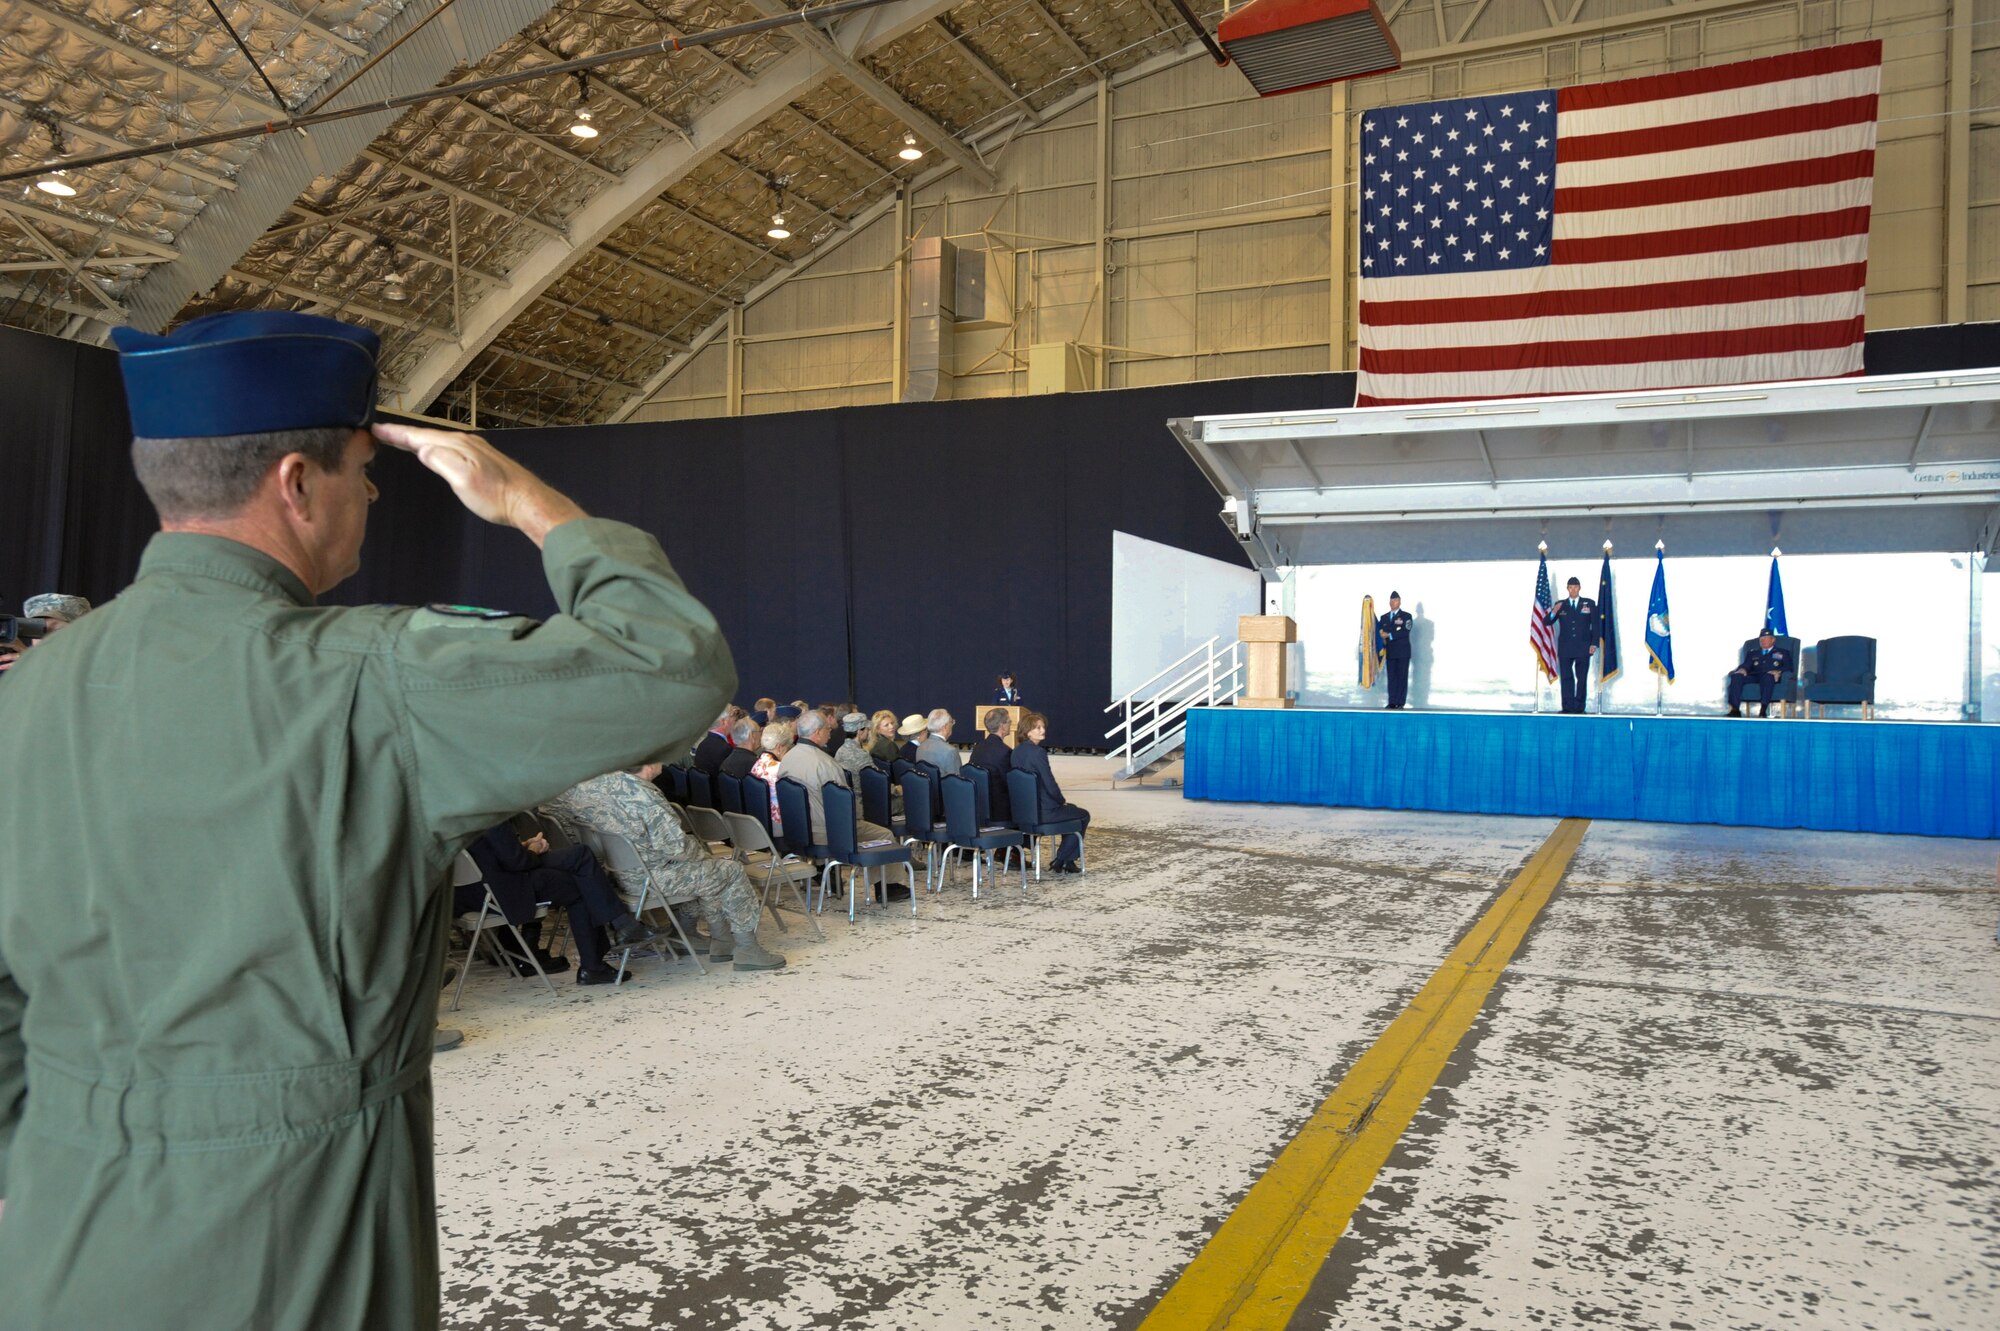 ELMENDORF AIR FORCE BASE, Alaska -- Col. Richard Walberg, 3rd Wing vice commander, presents Col. Thomas Bergeson with the first salute during the assumption of command ceremony at Hangar 1 Aug. 18th. The first salute signifies that the 3rd Wing is ready and willing to follow their newly appointed commanding officer into battle. (U.S. Air Force photo/Staff Sgt. Joshua Garcia)